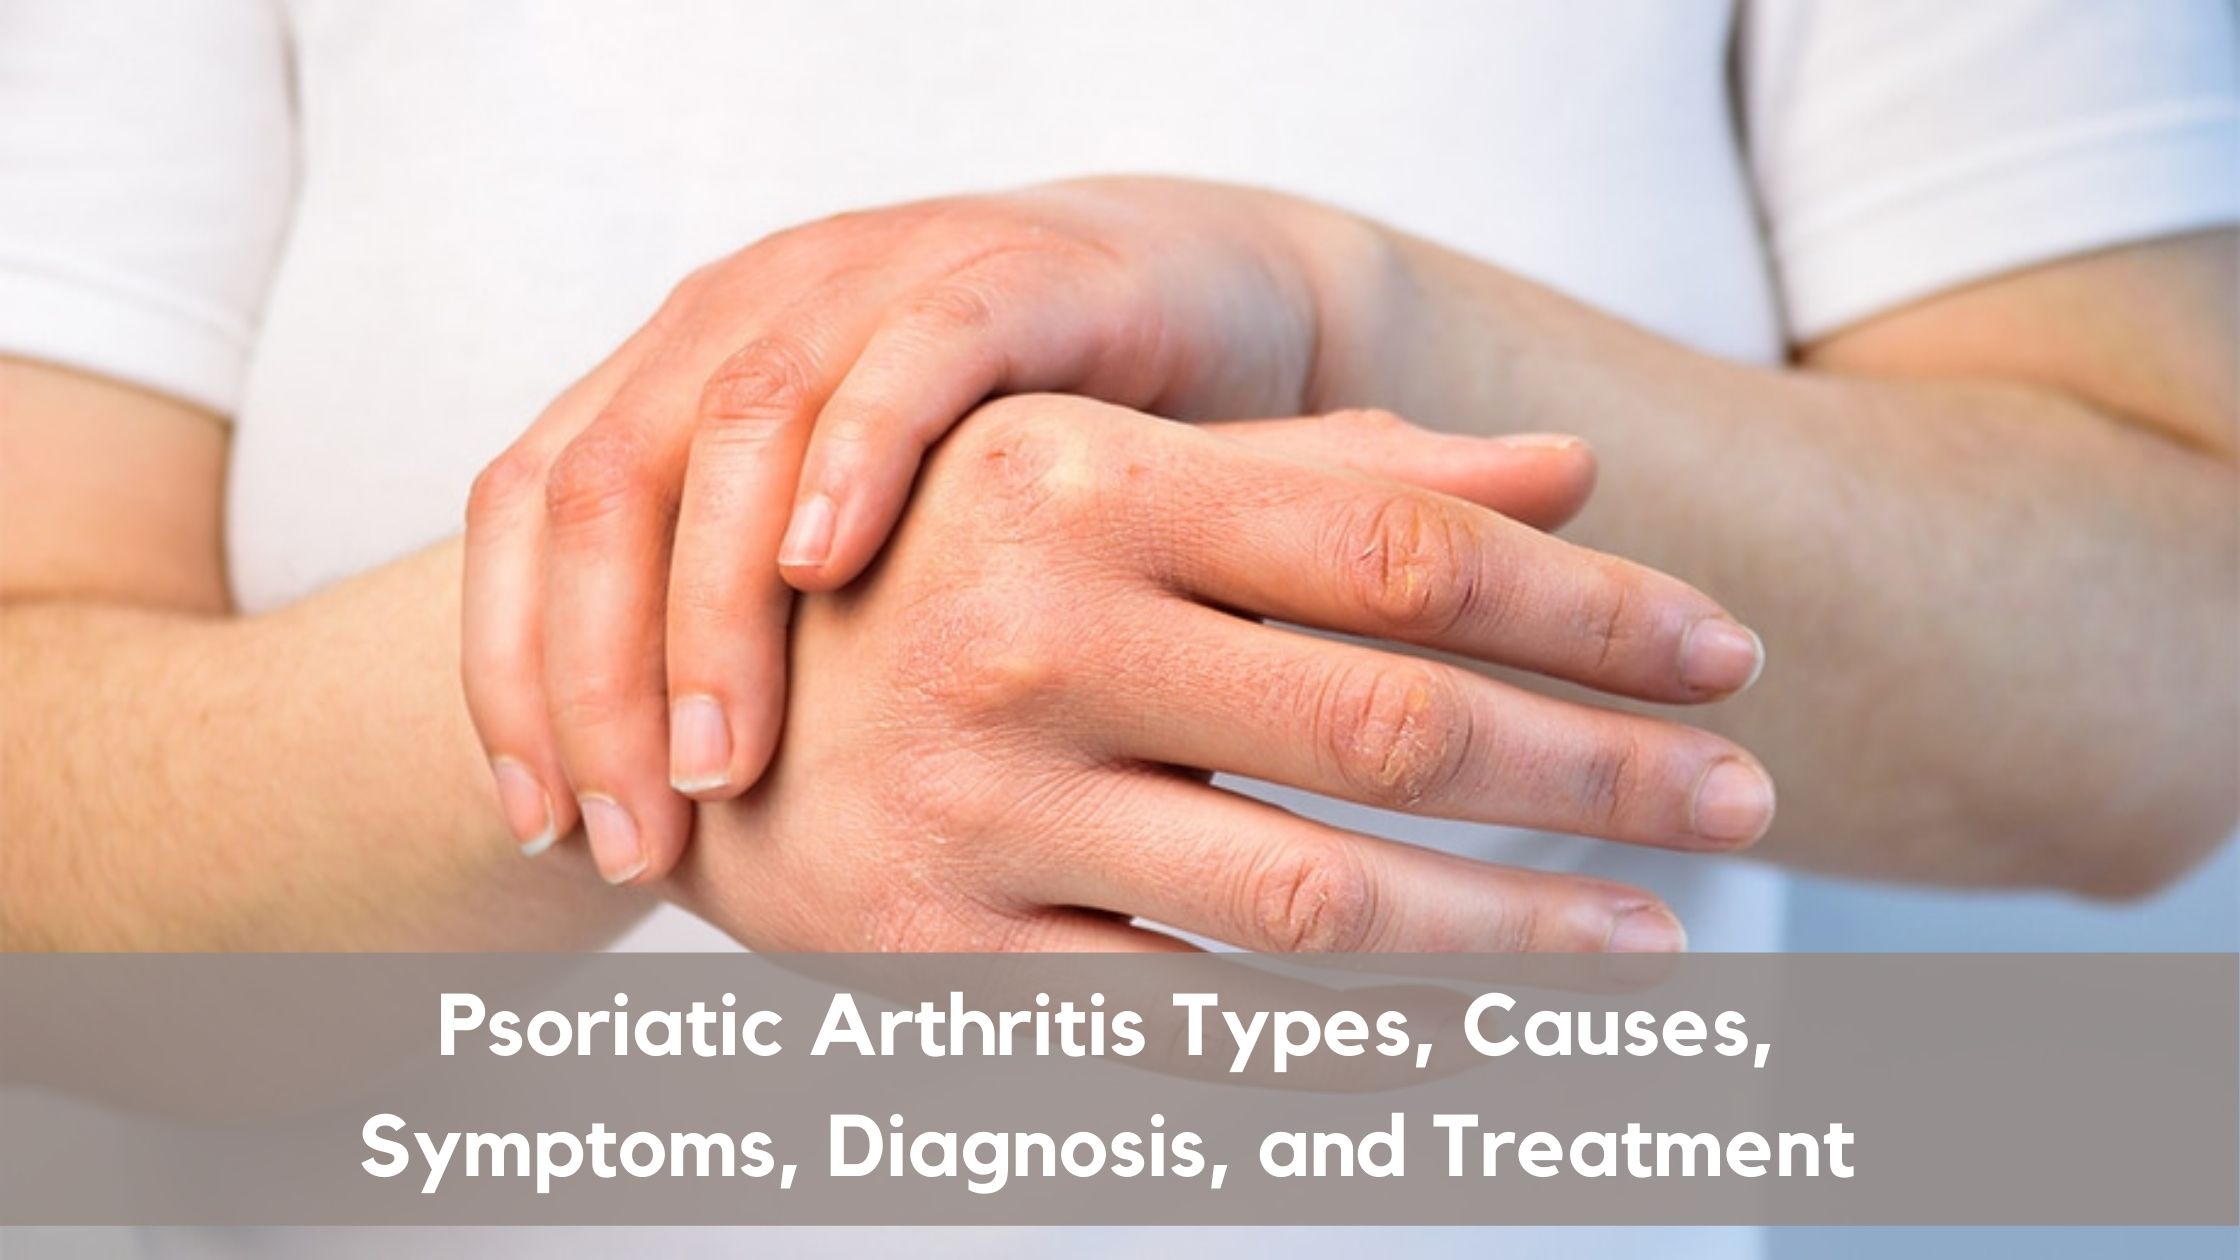 Everything You Need to Know About Psoriatic Arthritis - VIMS